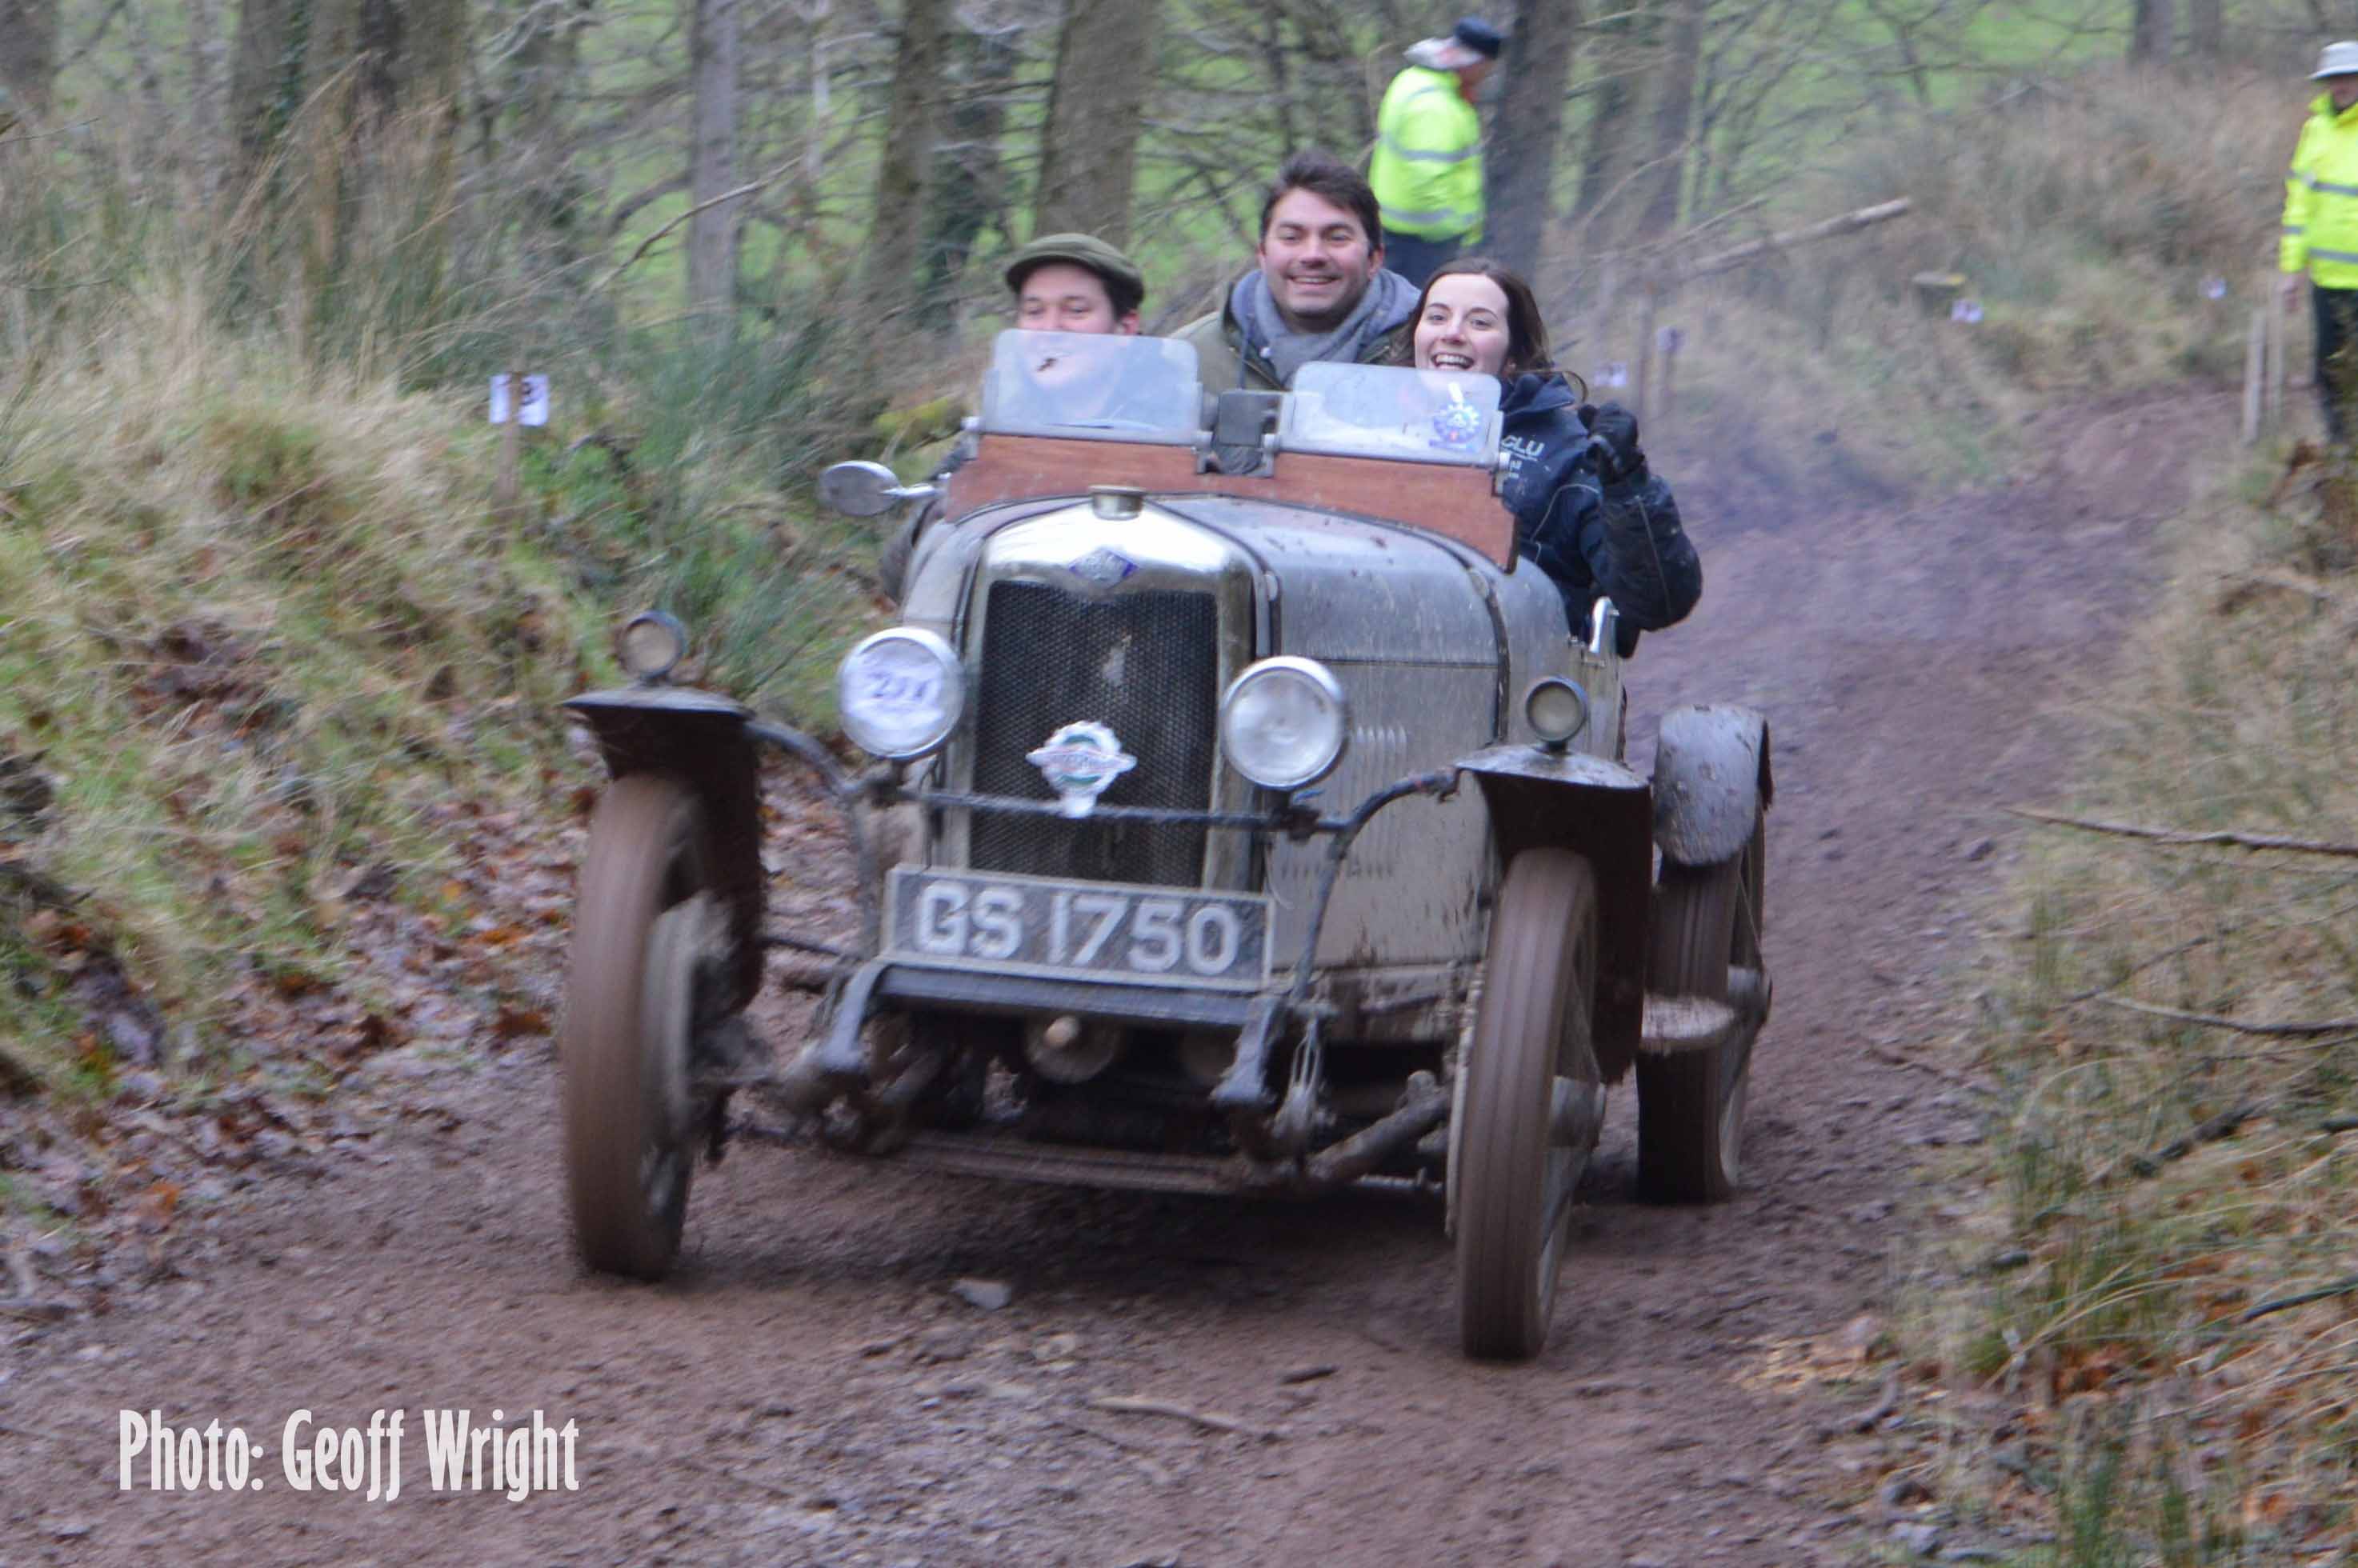 VSCC Trials Season gets underway with the Exmoor Fringe this weekend cover